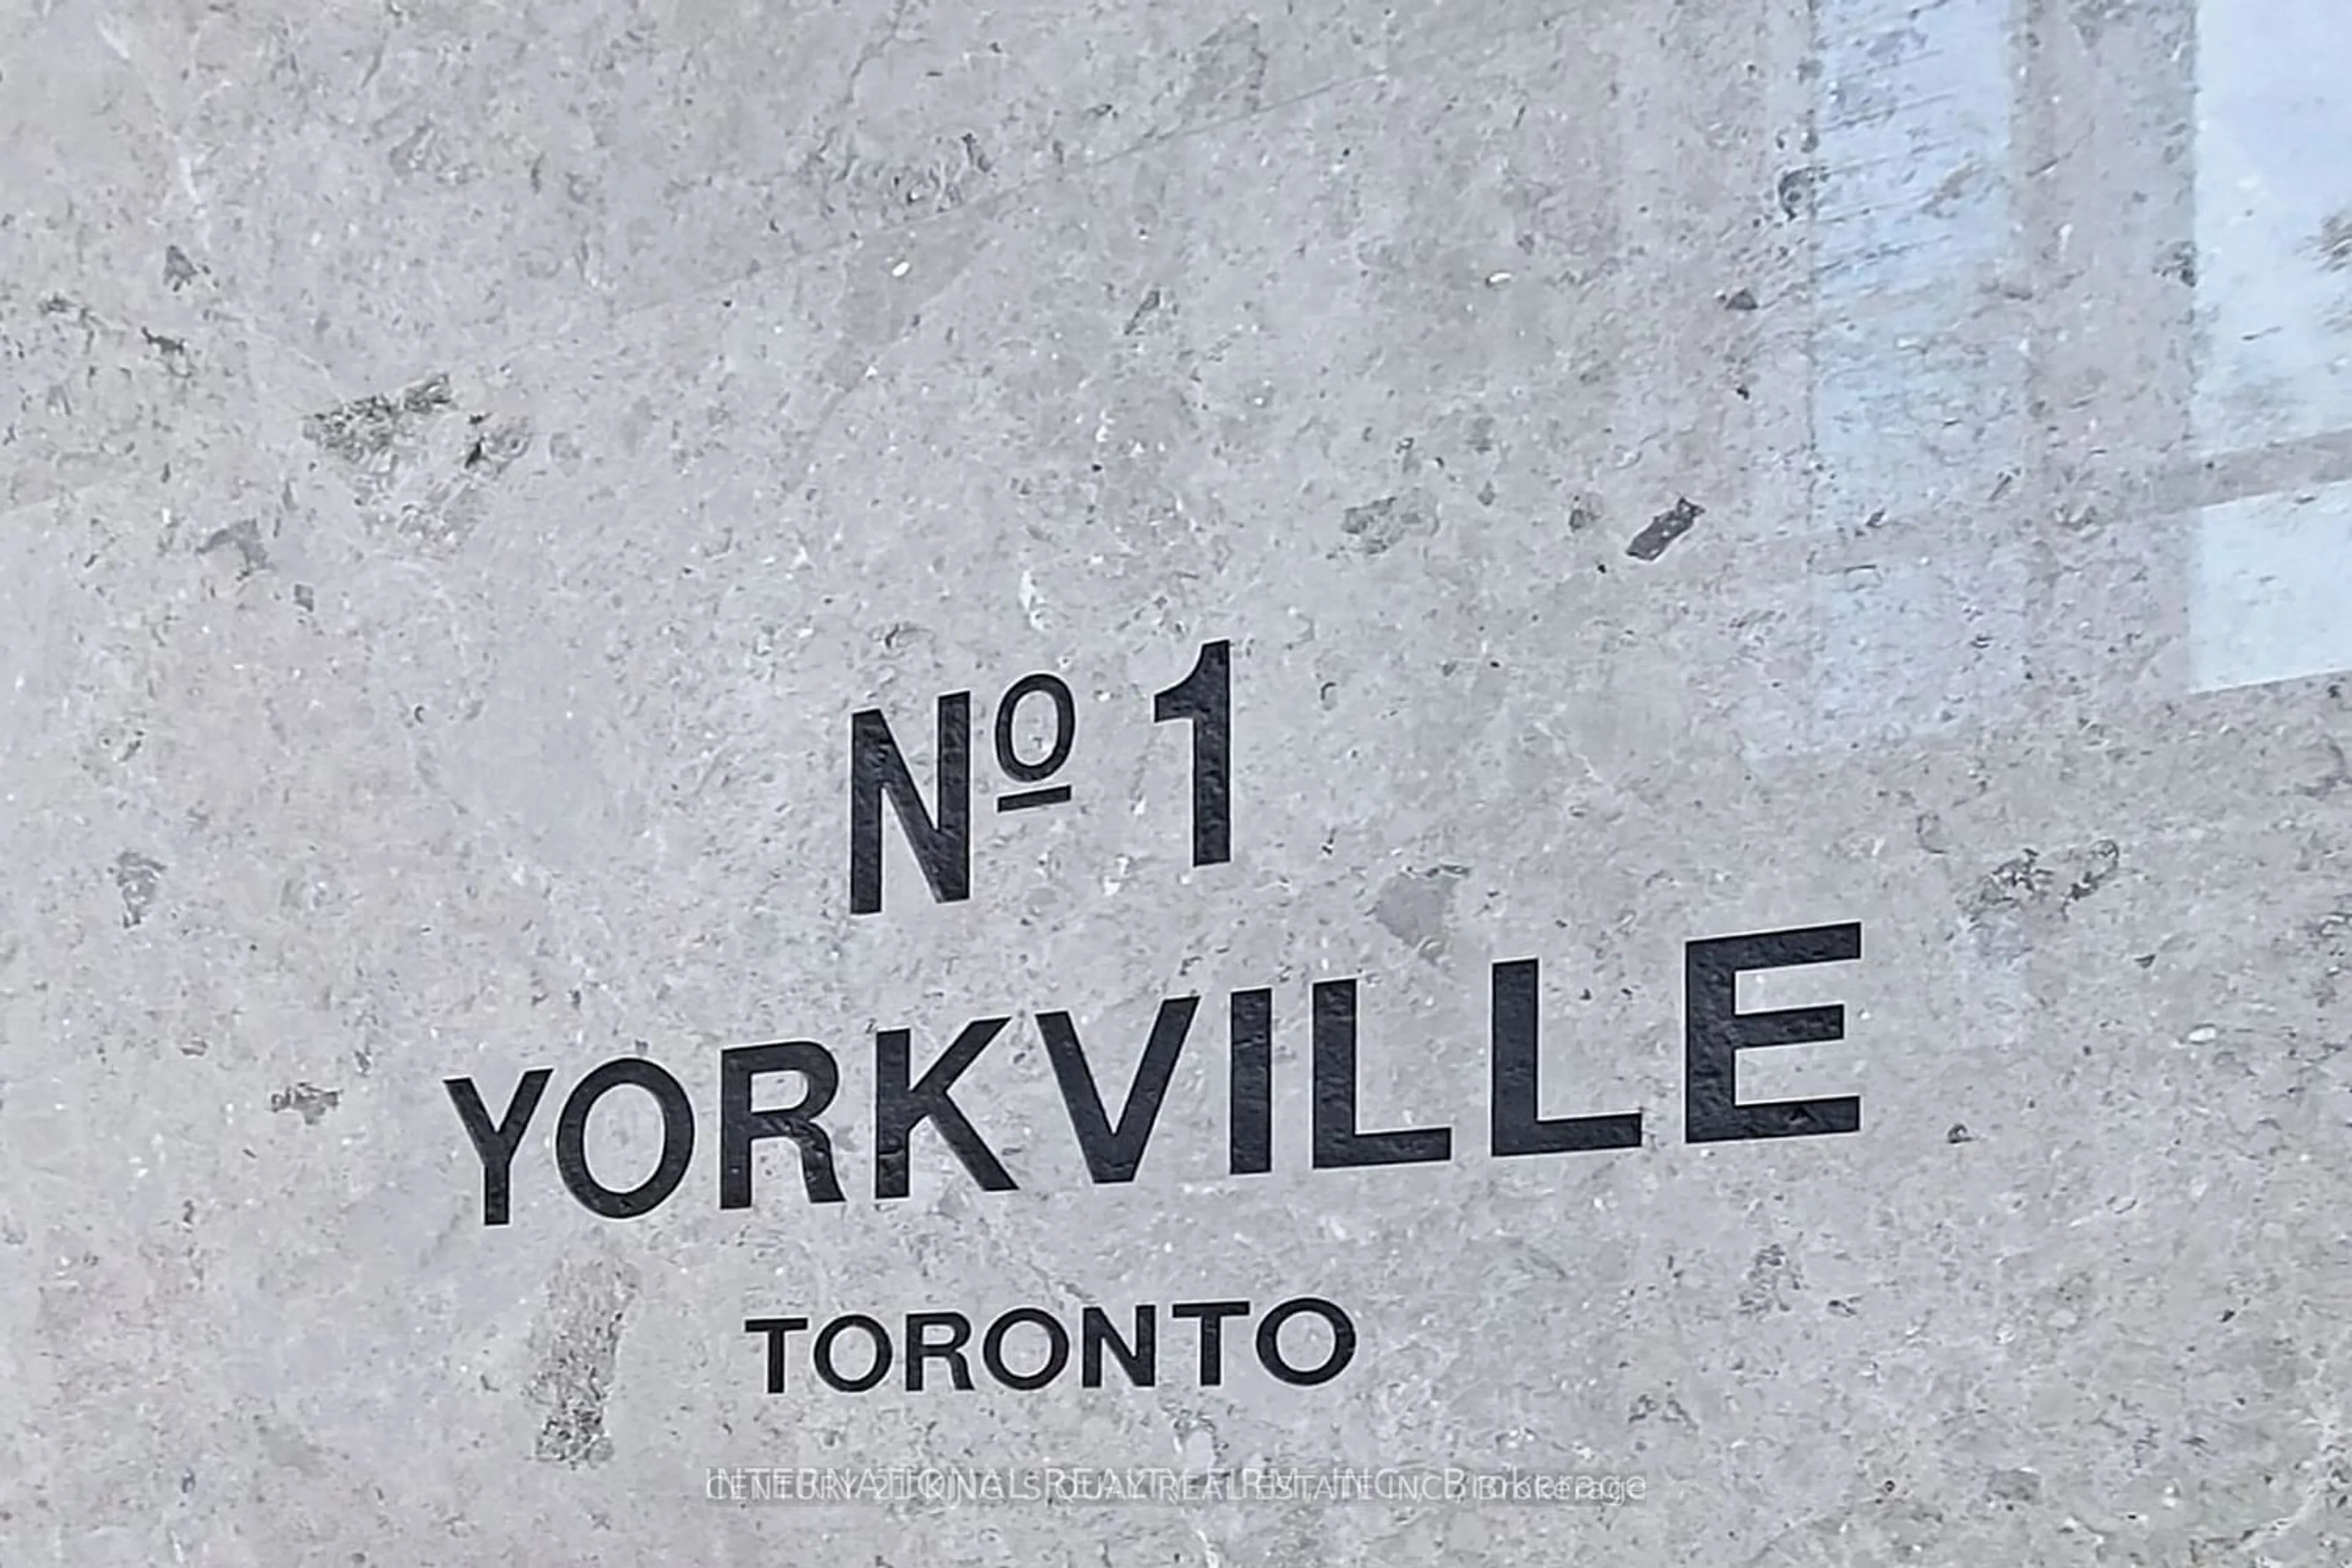 Entrance door to the home or apartment or basement for 1 Yorkville Ave #2001, Toronto Ontario M4W 0B1